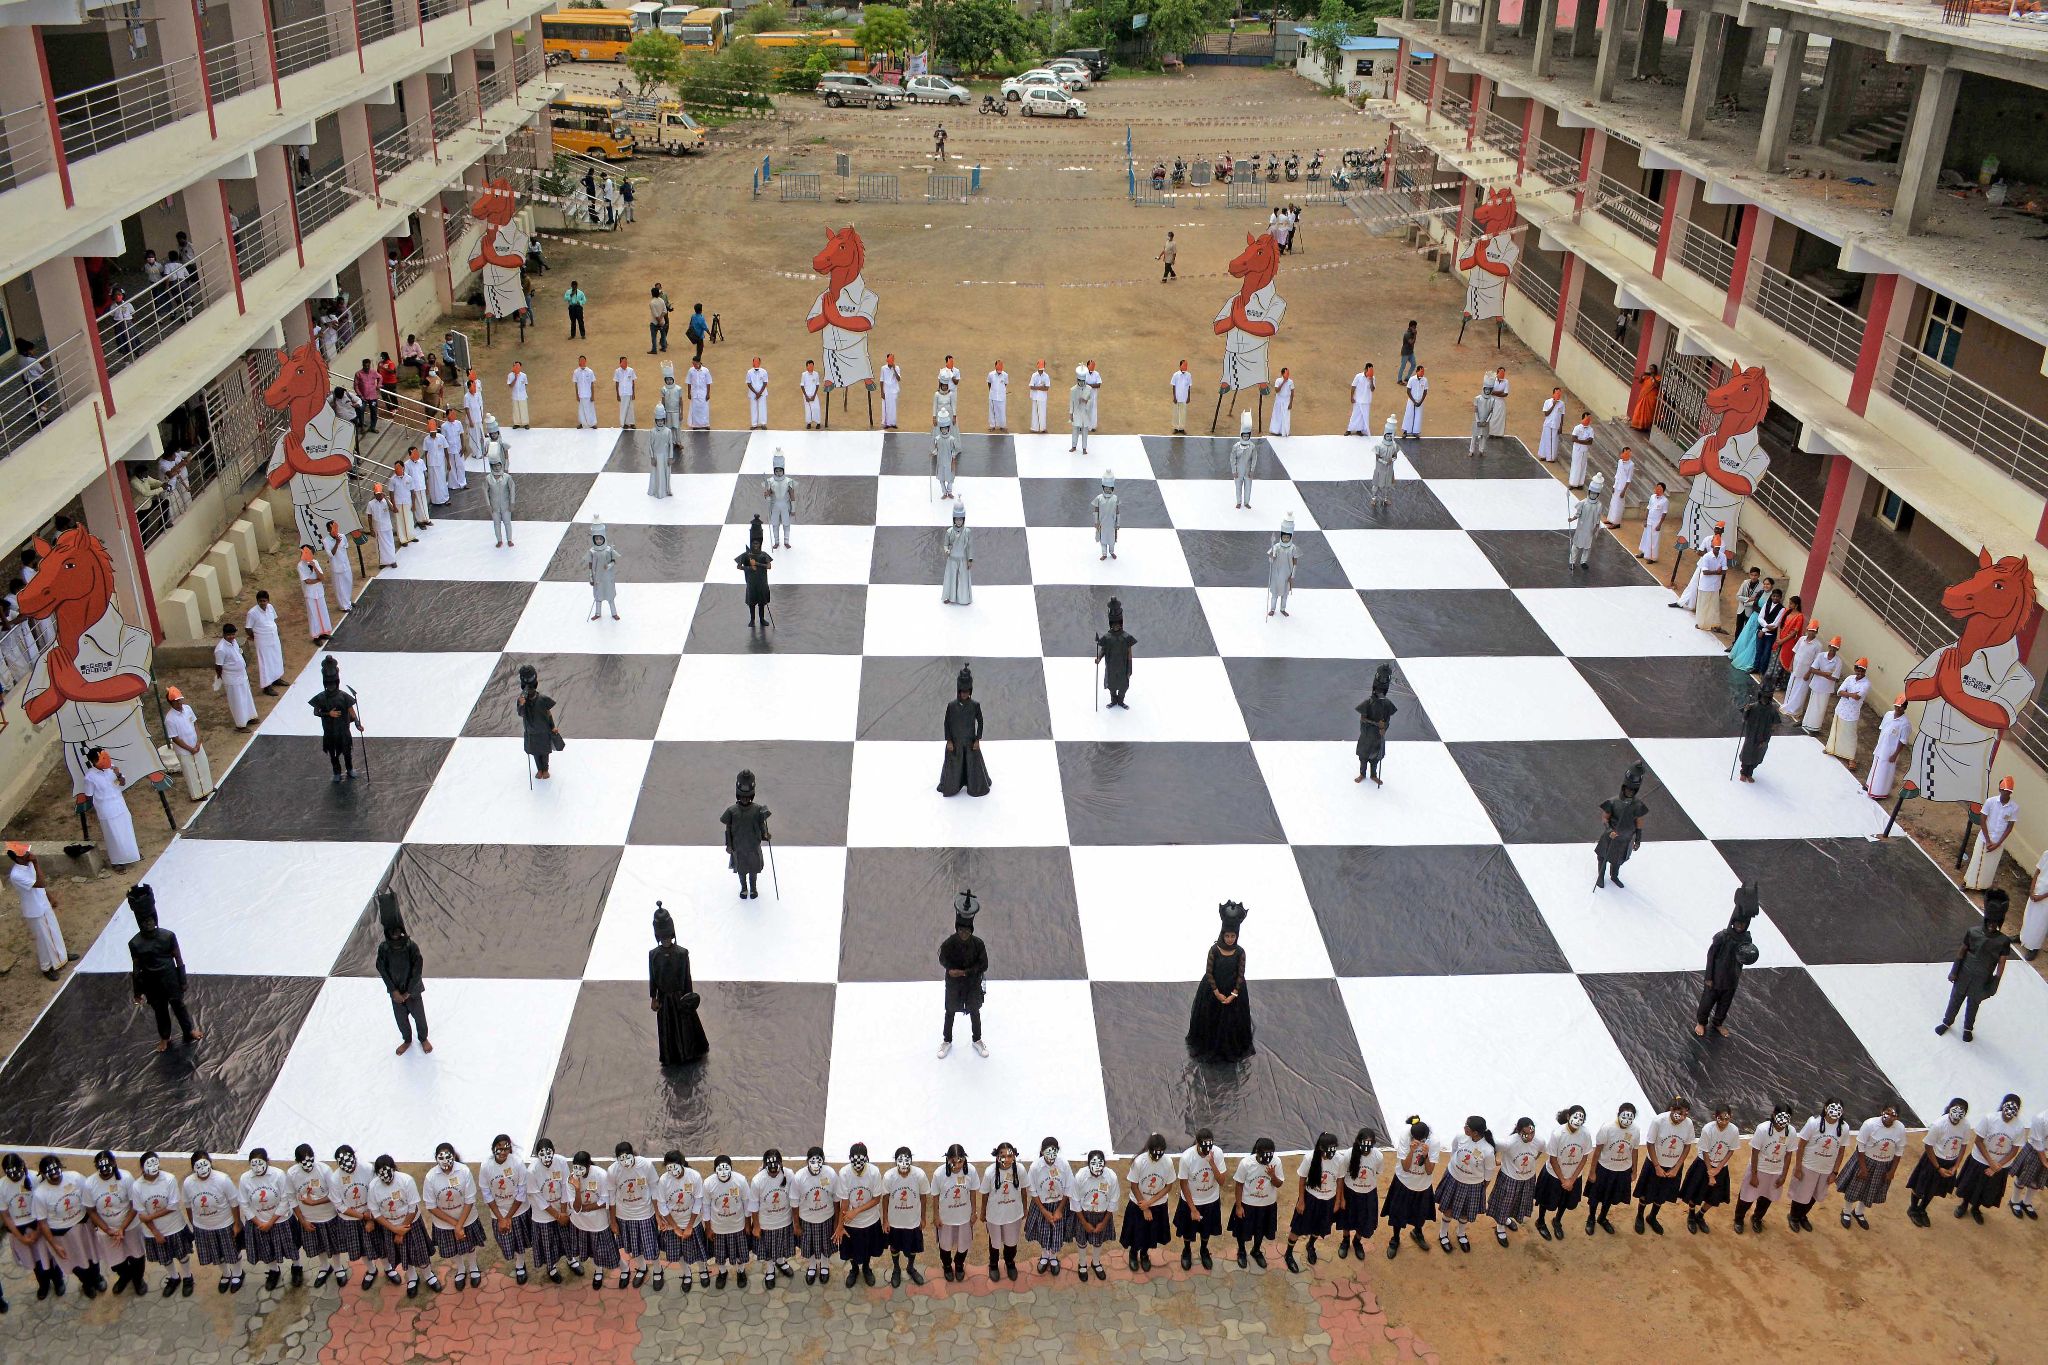 Read all Latest Updates on and about Chess Olympiad